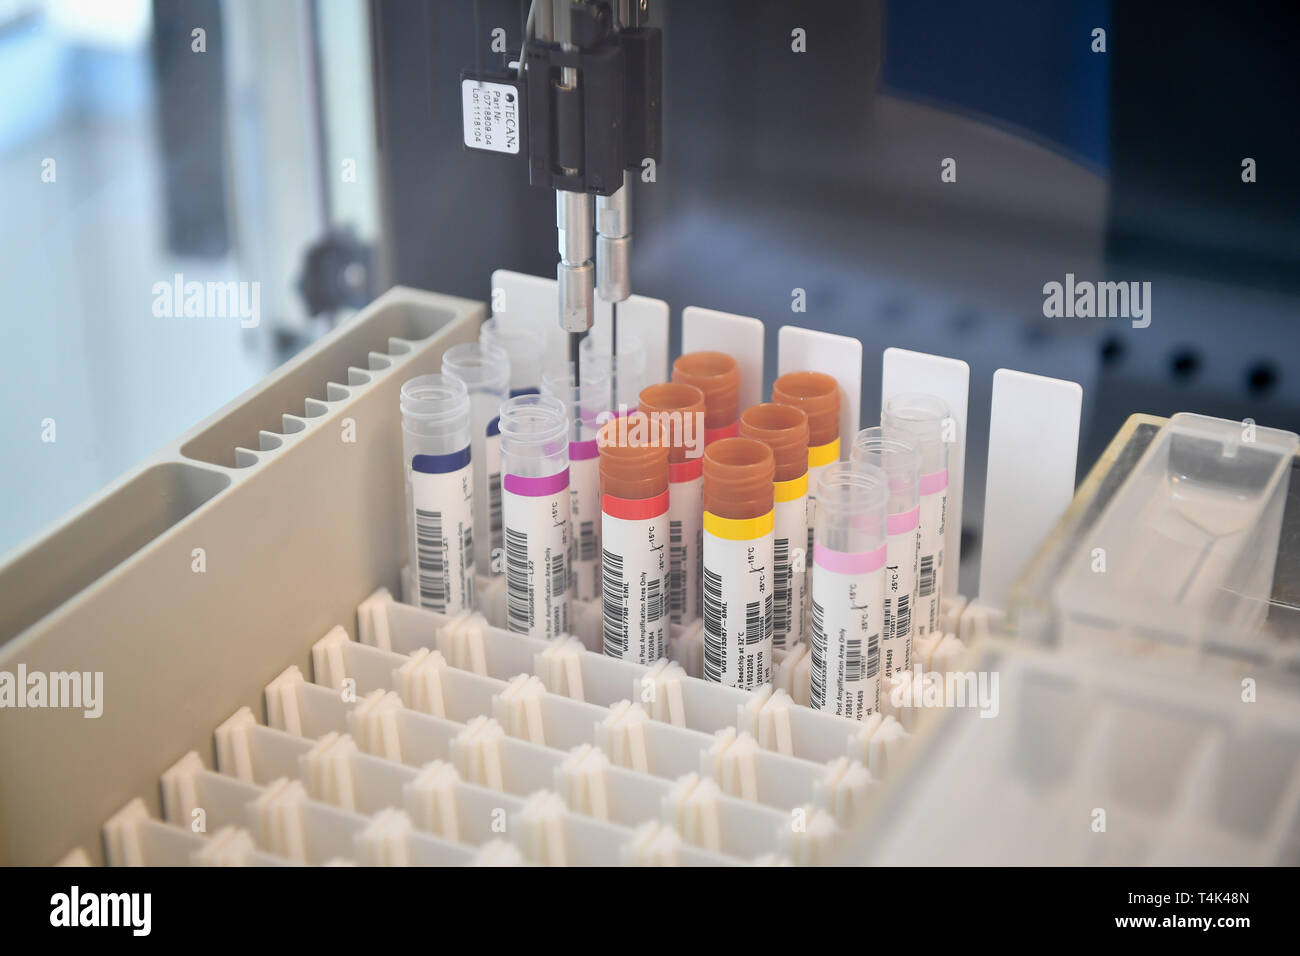 Samples are prepared for DNA extraction in a medical clinical laboratory, based at University of Bristol. PRESS ASSOCIATION Photo. Picture date: Monday April 8, 2019. Photo credit should read: Ben Birchall Stock Photo